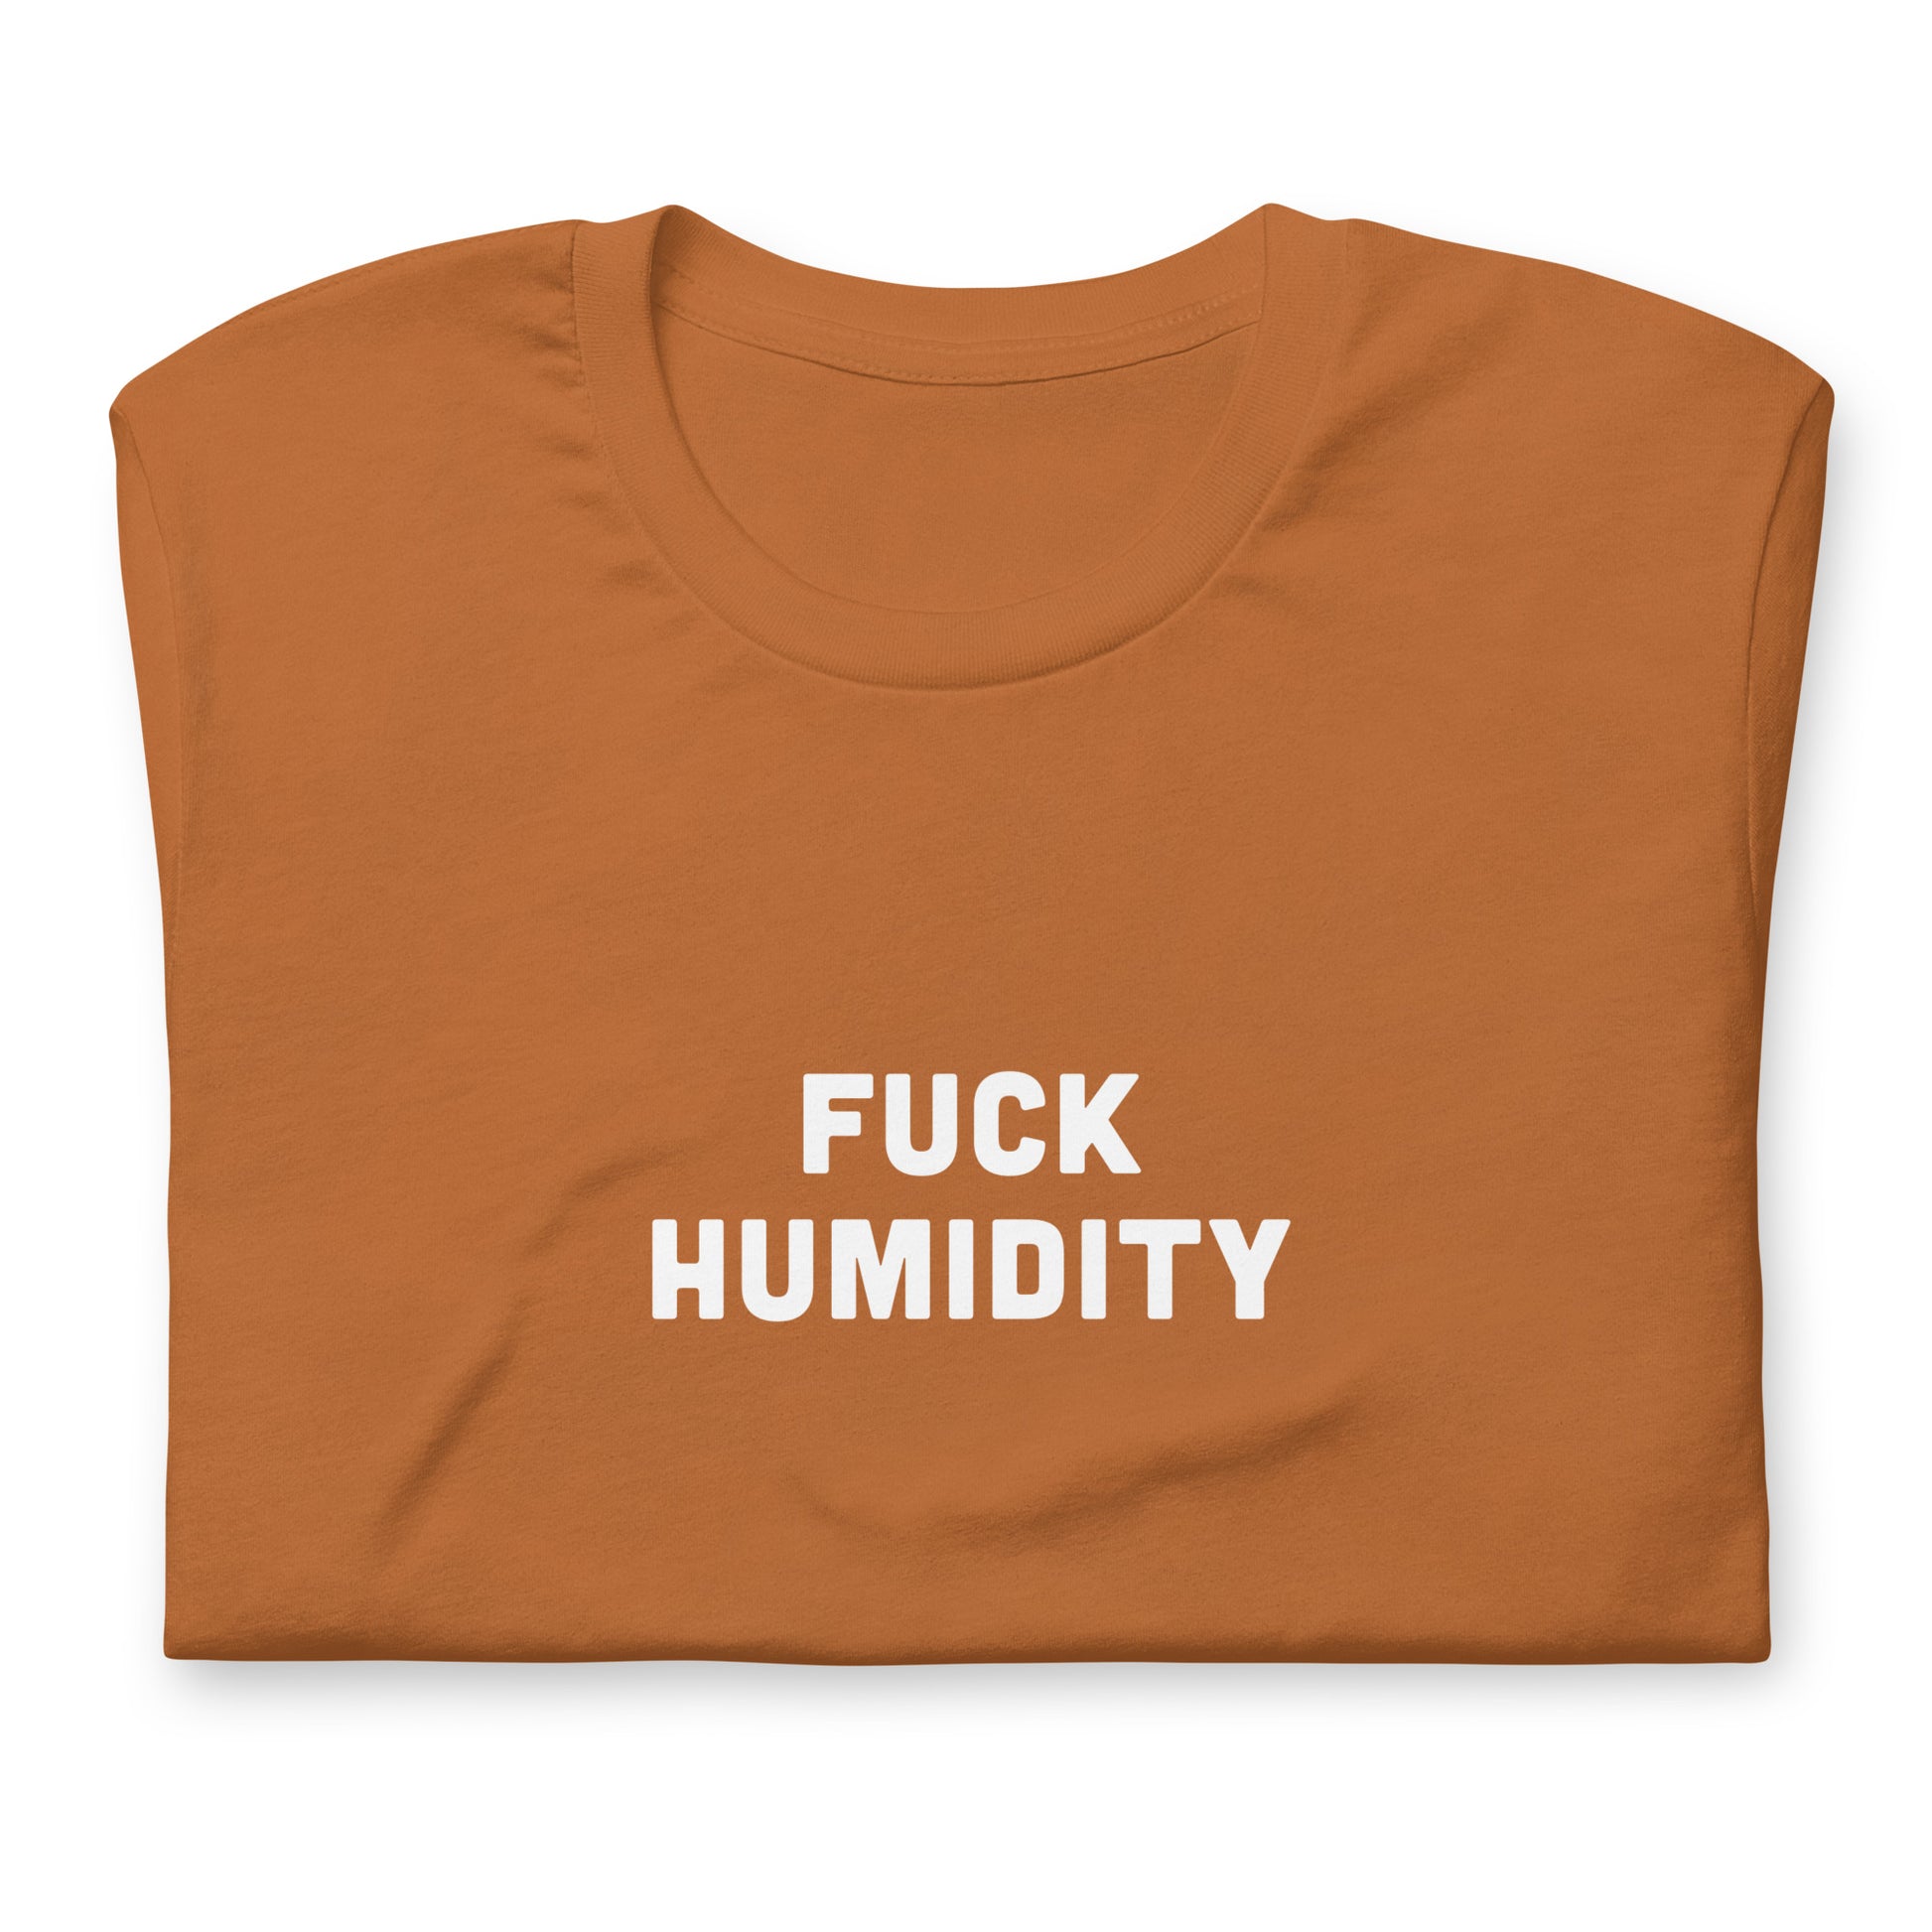 Fuck Humidity T-Shirt Size XL Color Navy